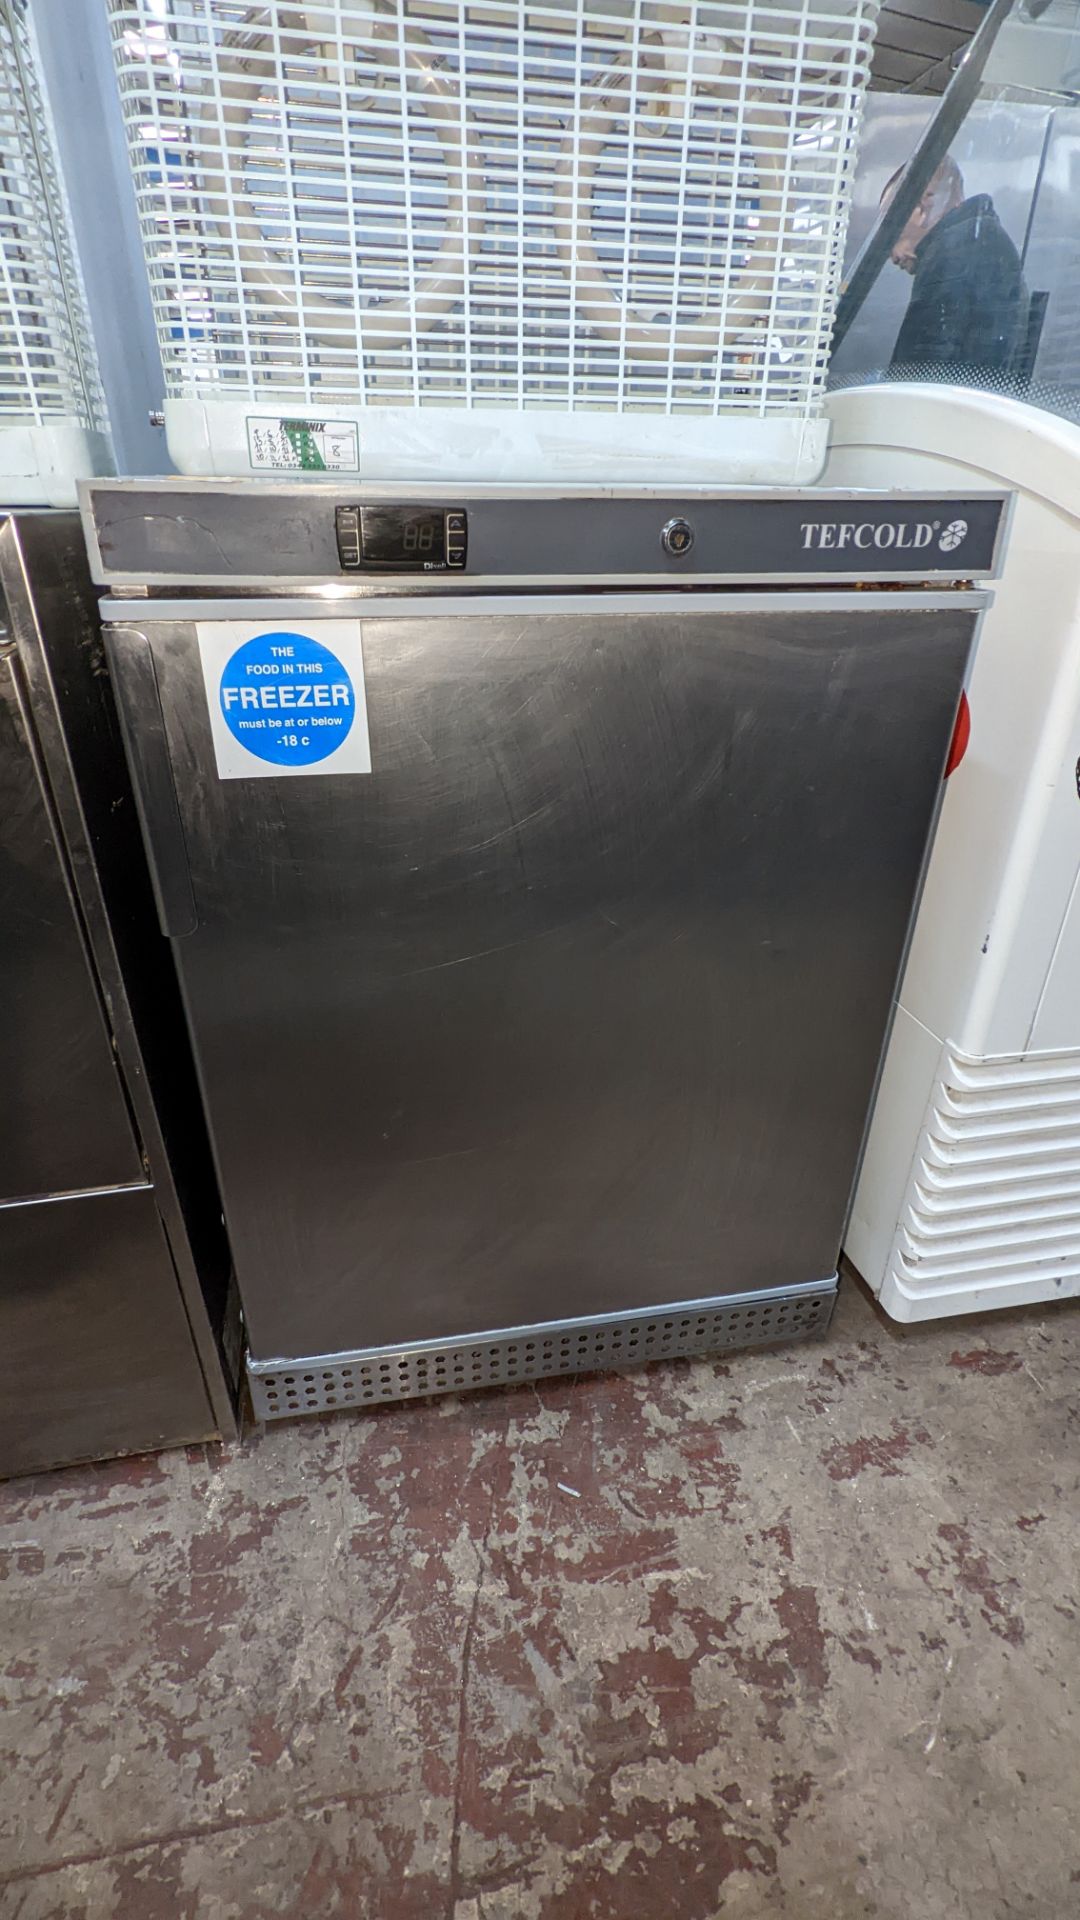 Tefcold stainless steel undercounter freezer - Image 2 of 5